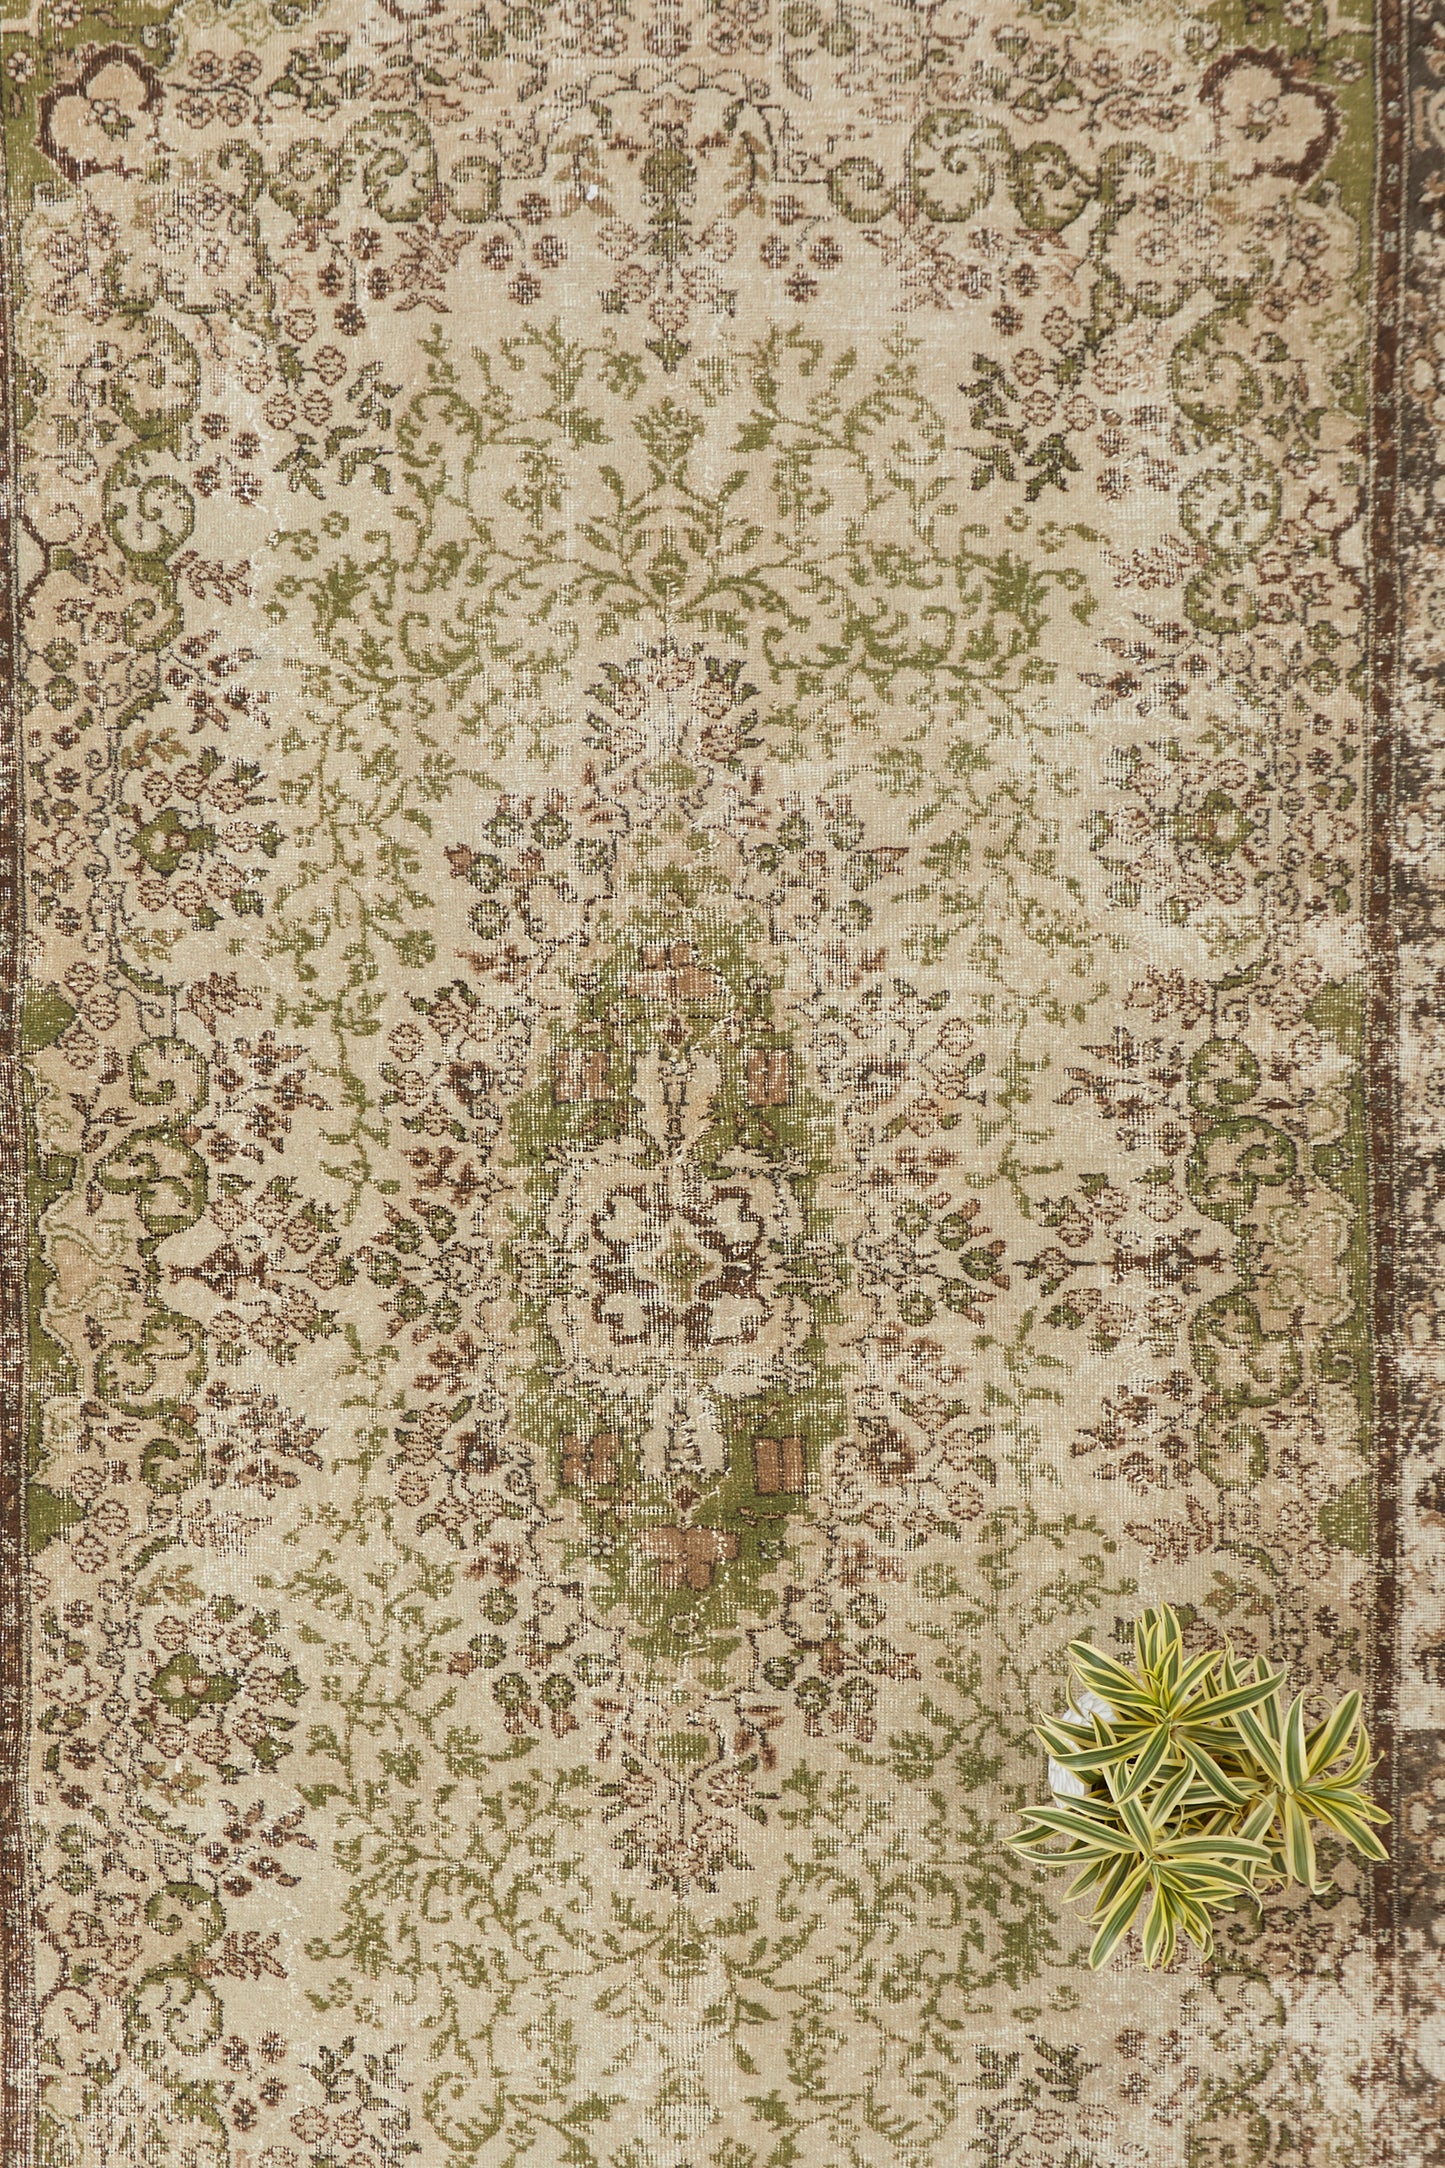 'Aries' Turkish Vintage Area Rug - 6'4" x 10'8" - Canary Lane - Curated Textiles